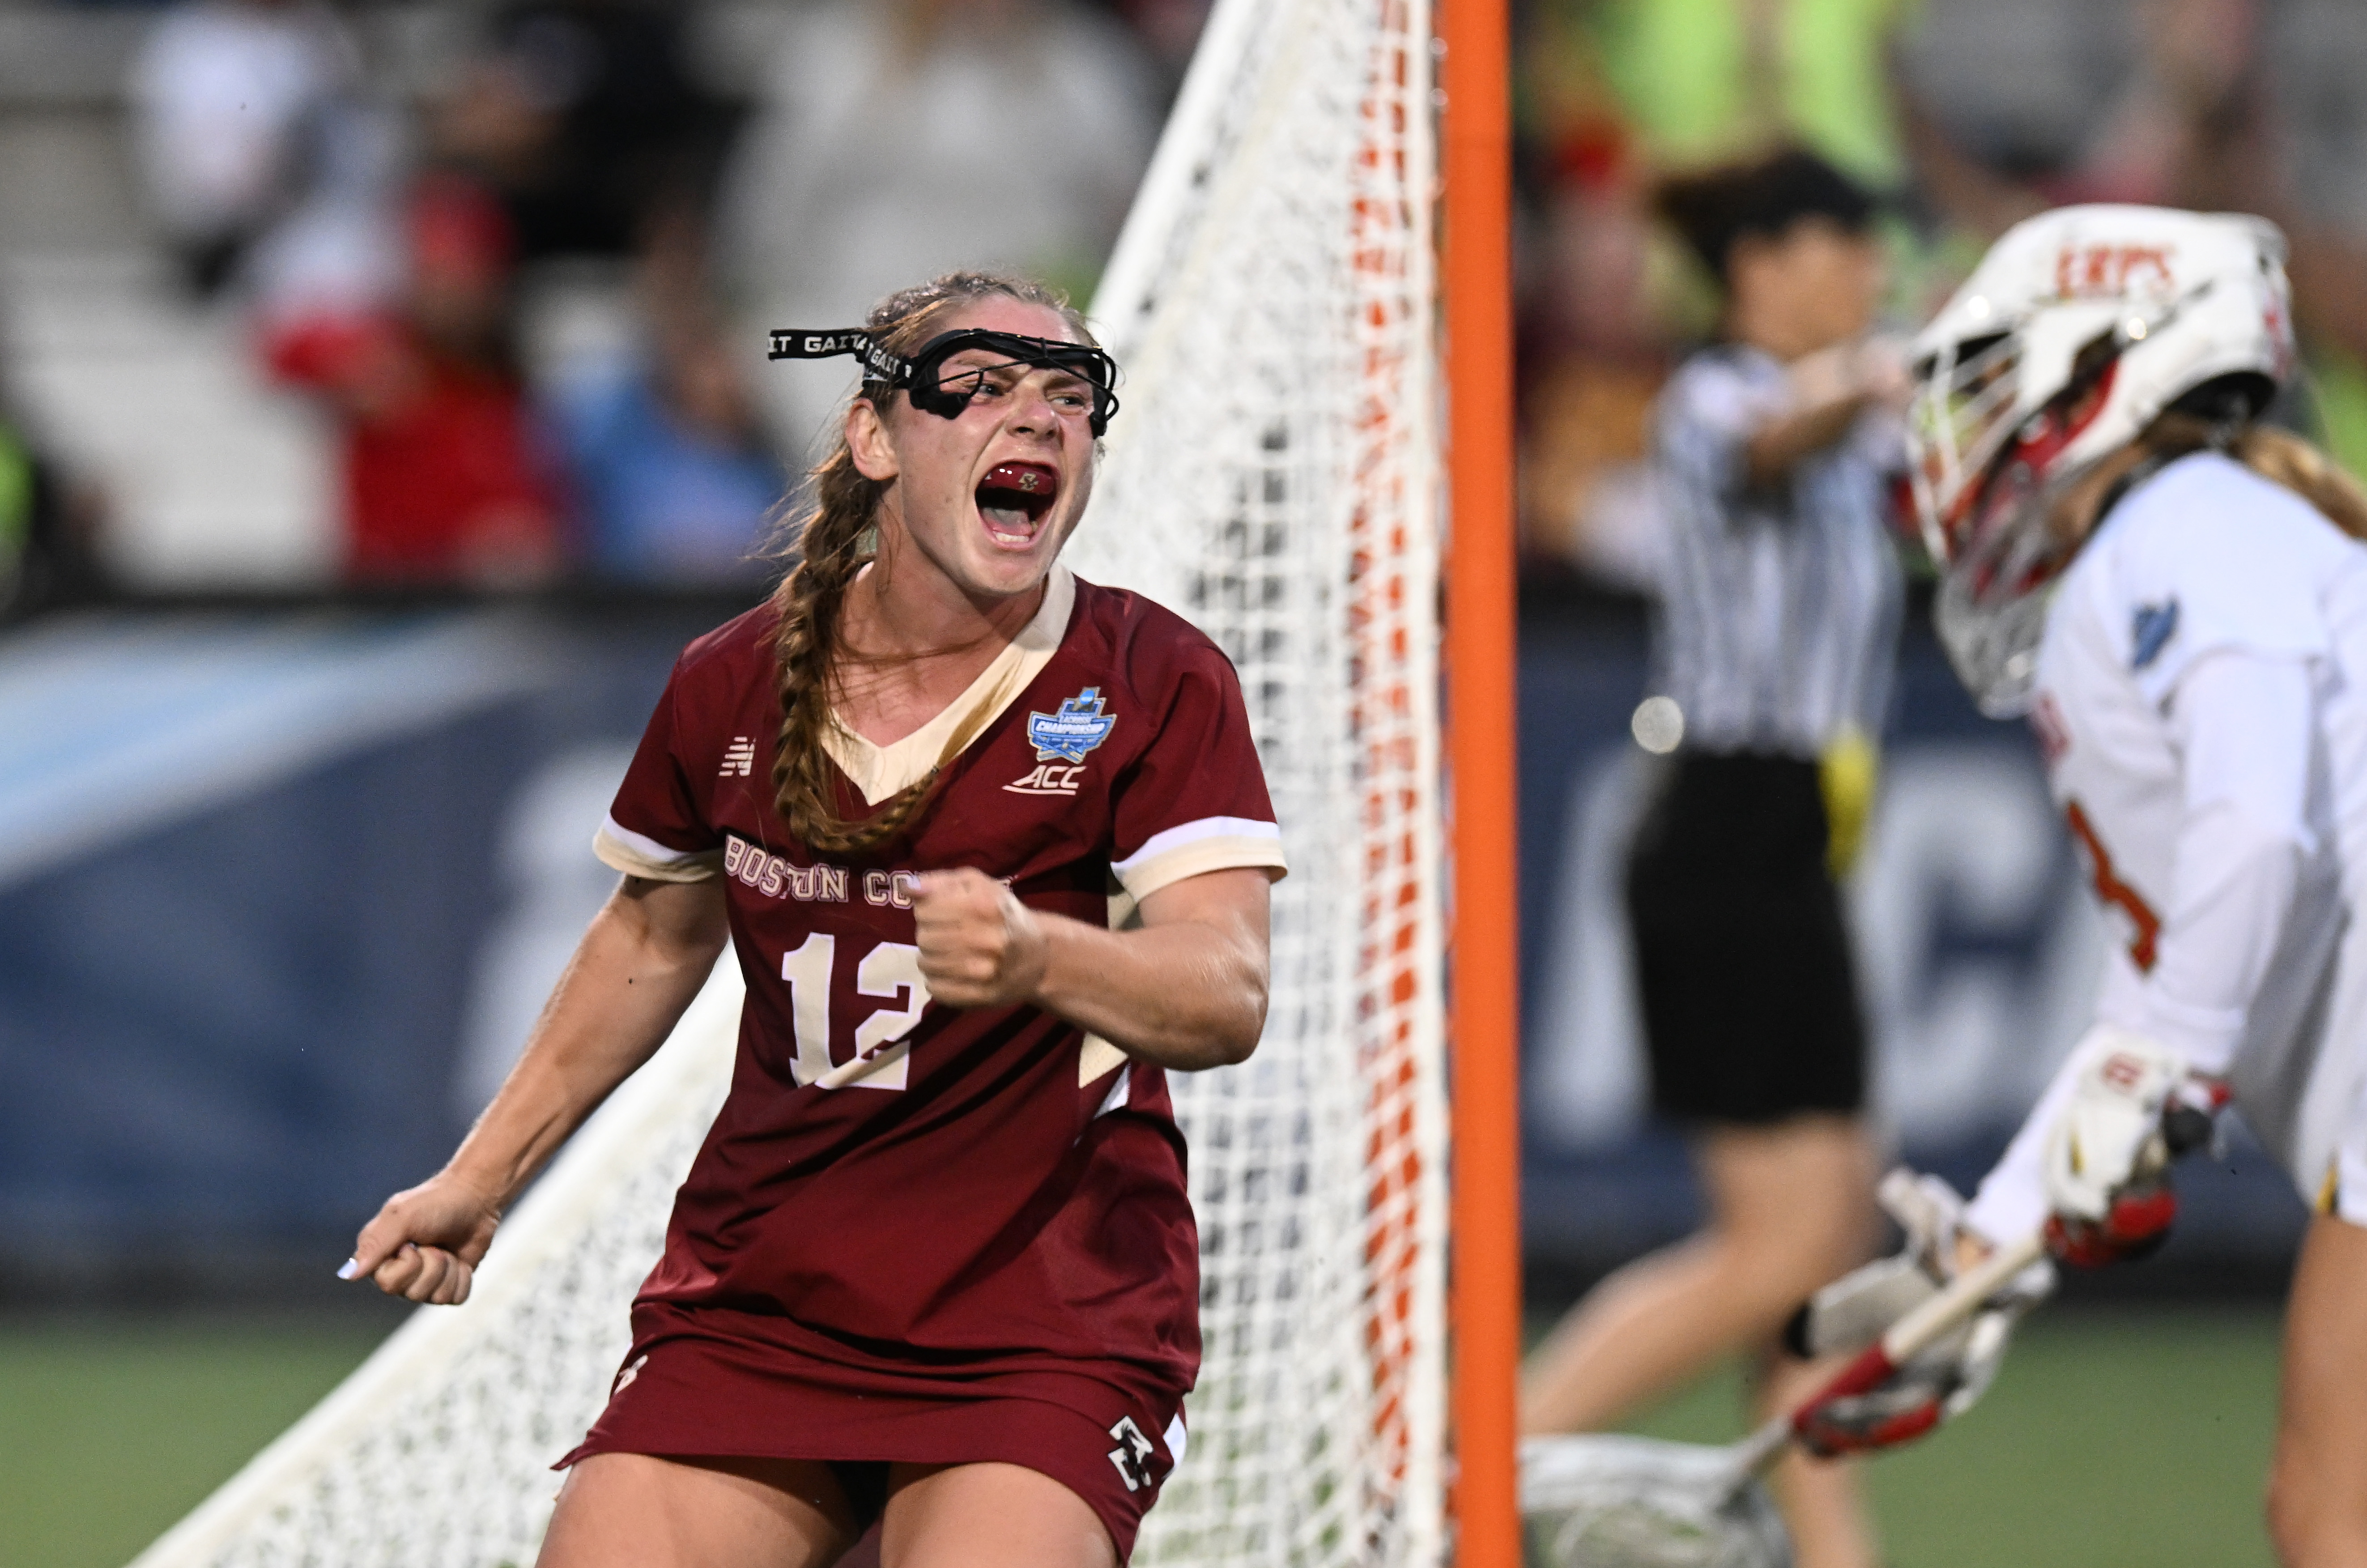 2022 NCAA Division I Women’s Lacrosse Semifinals